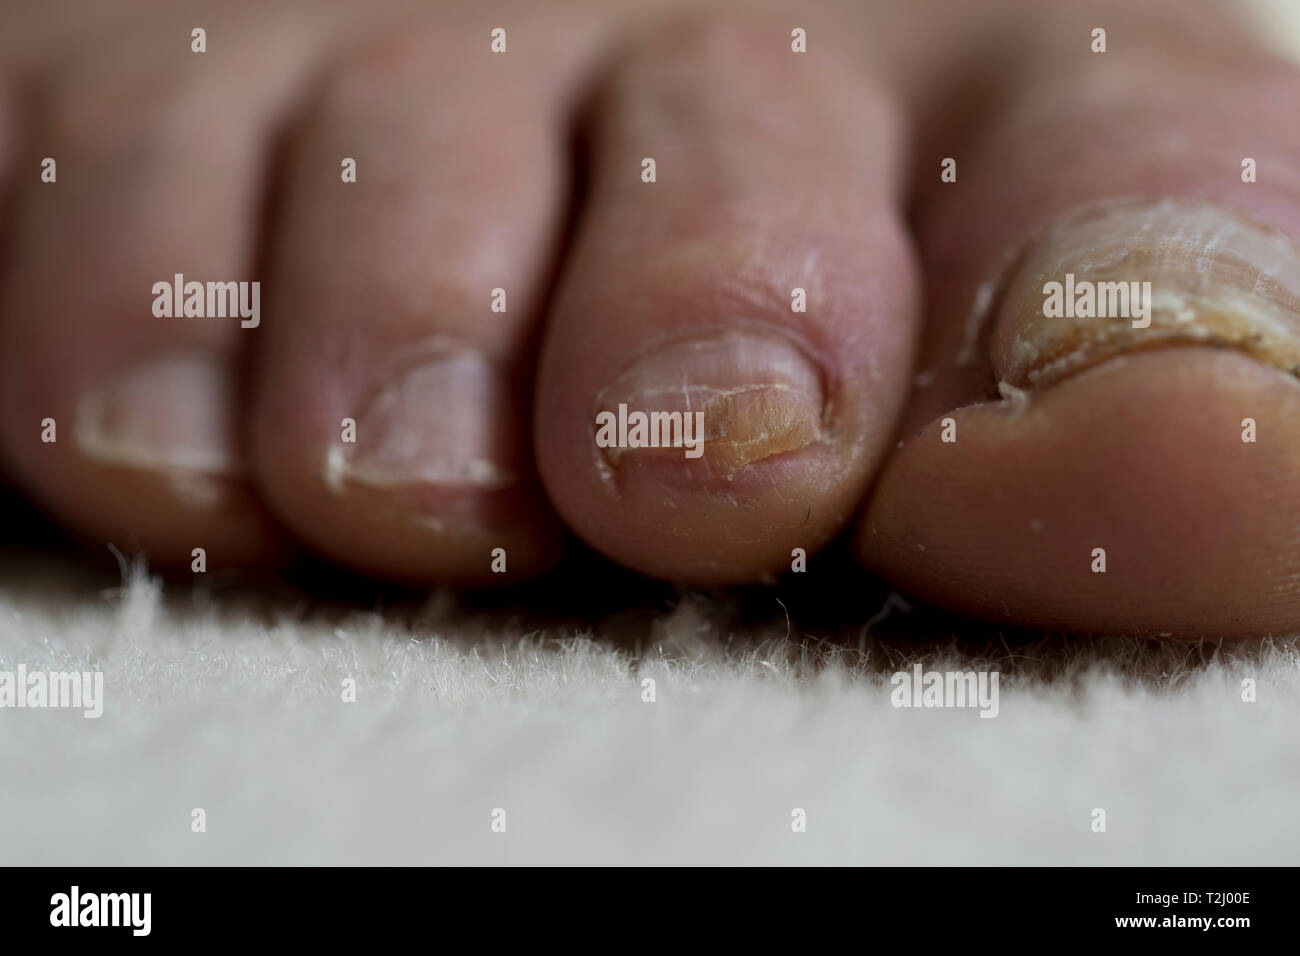 Toenail damage close up. Feet of an old man with toenail trauma and bacterial infection. Stock Photo